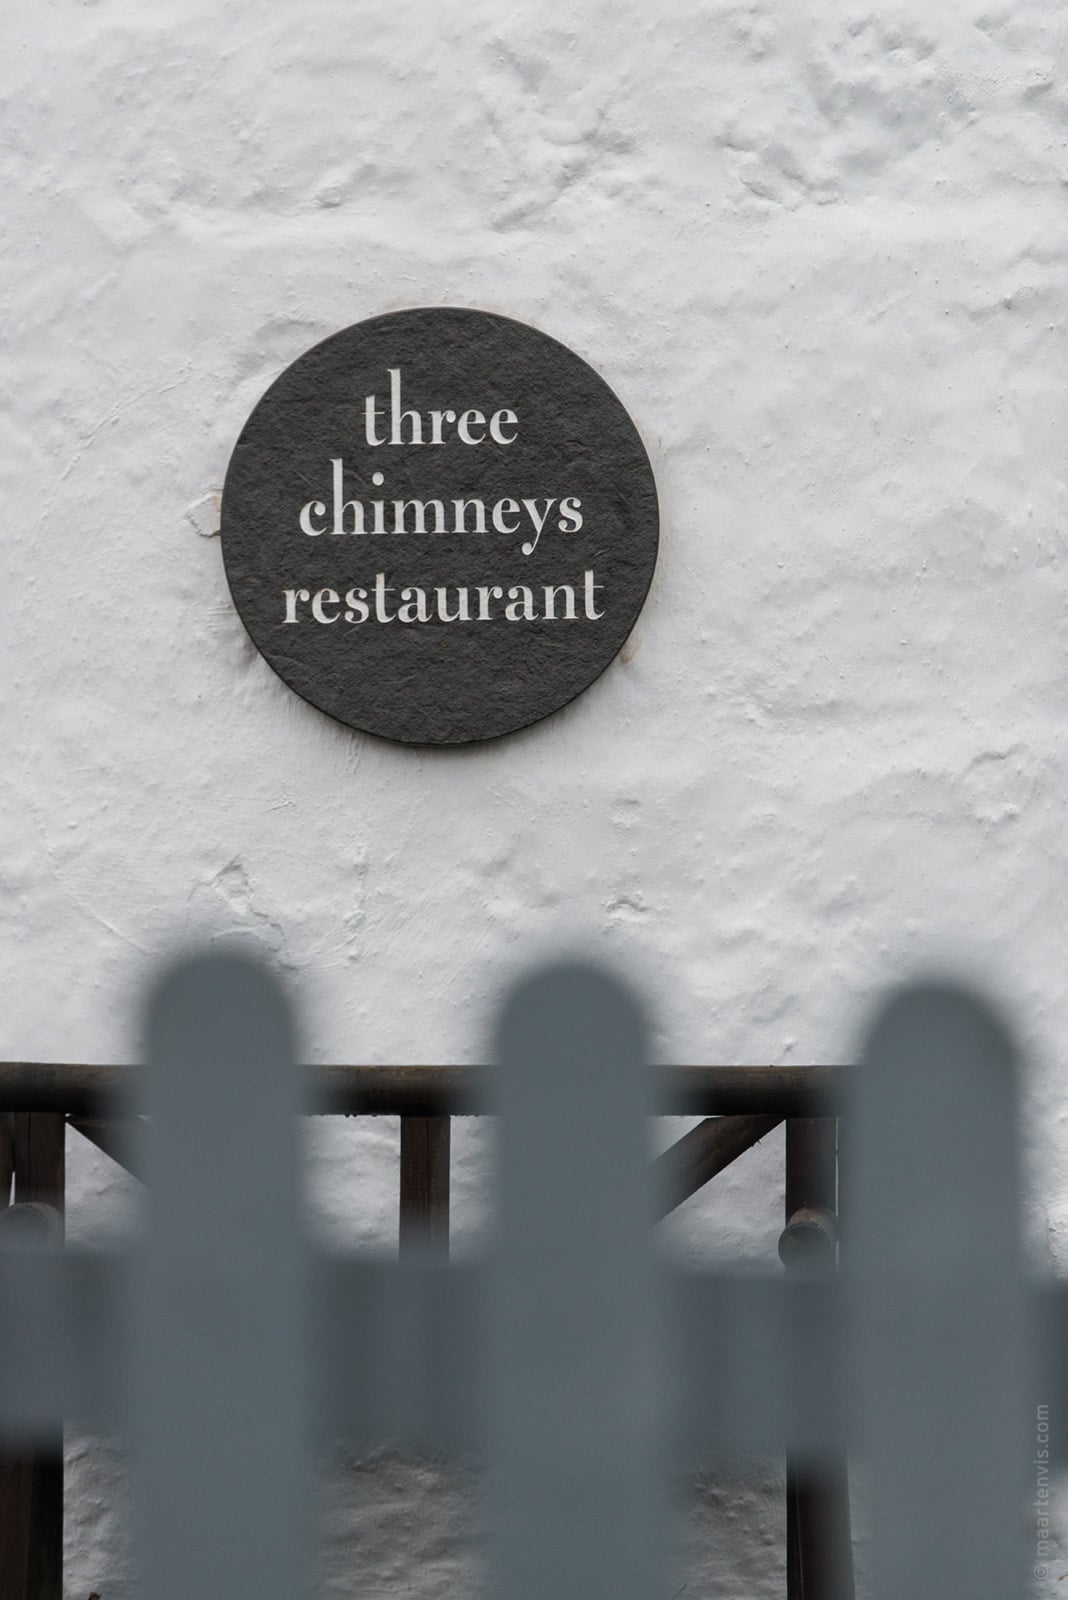 20150520 8279 - At the Chef's Table in the Three Chimneys